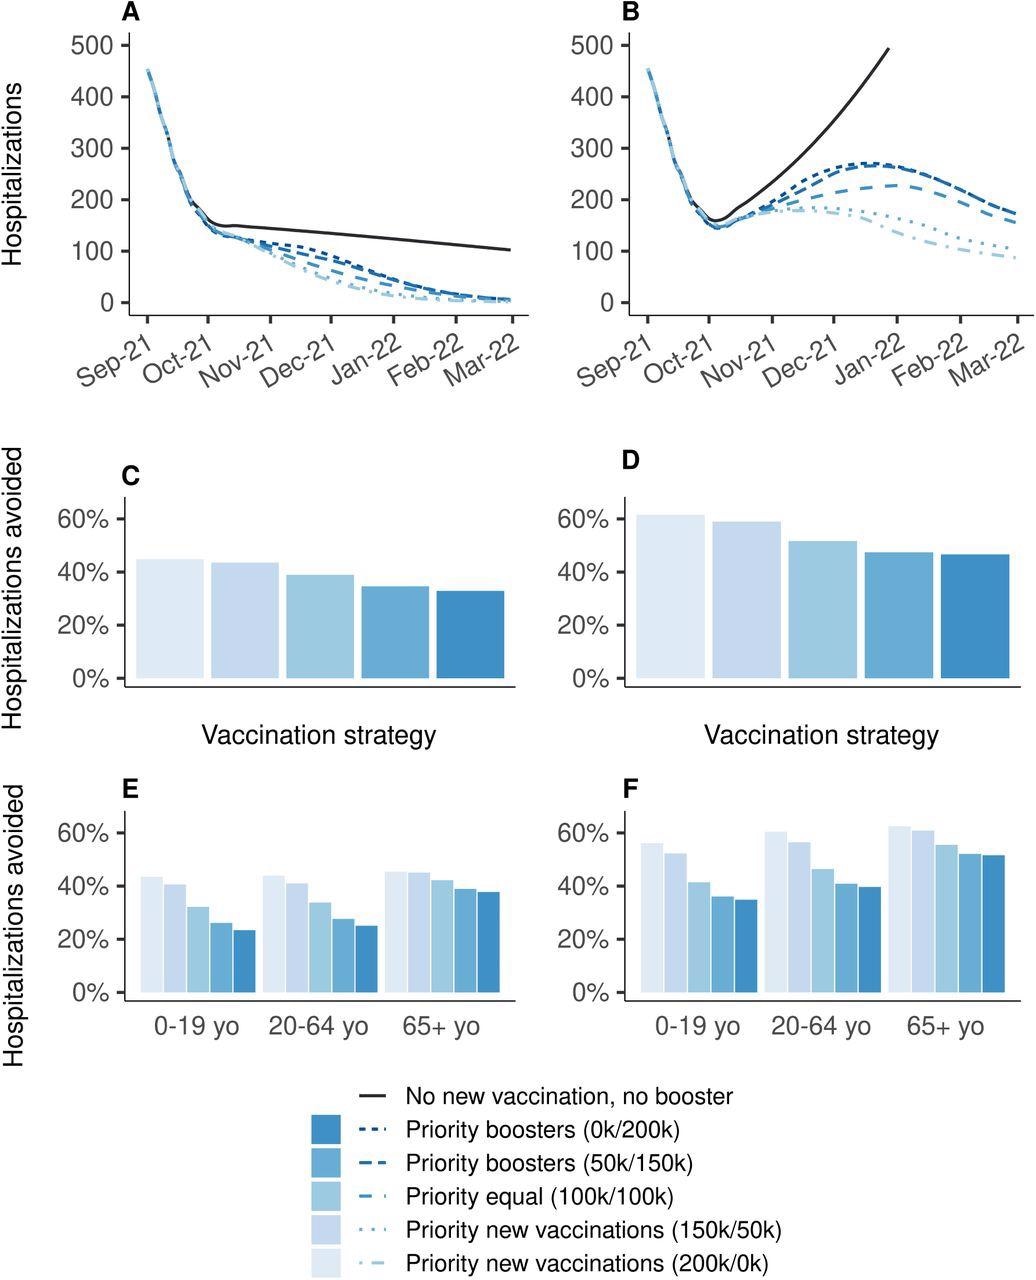 Effectiveness on hospitalizations of vaccination strategies varying in the allocation of 200,000 daily doses between primary vaccination and booster shots, over the period from September 1st, 2021 to March 1st, 2022, compared to a baseline scenario in which all vaccination is stopped on September 1st, 2021. (A, C, E) Vaccine efficacy decreased only for people aged 65 years and older. (B, D, F) Vaccine efficacy decreased for all age groups. (A,B) Daily new hospitalizations, (C, D) proportion of hospitalizations avoided, (E, F) proportion of hospitalizations avoided by age group. A prioritization strategy of (150k/50k) means 150k daily doses for primary vaccination and 50k daily booster doses until 90% coverage of one target population is reached, then all 200k daily doses are allocated to the other target population.